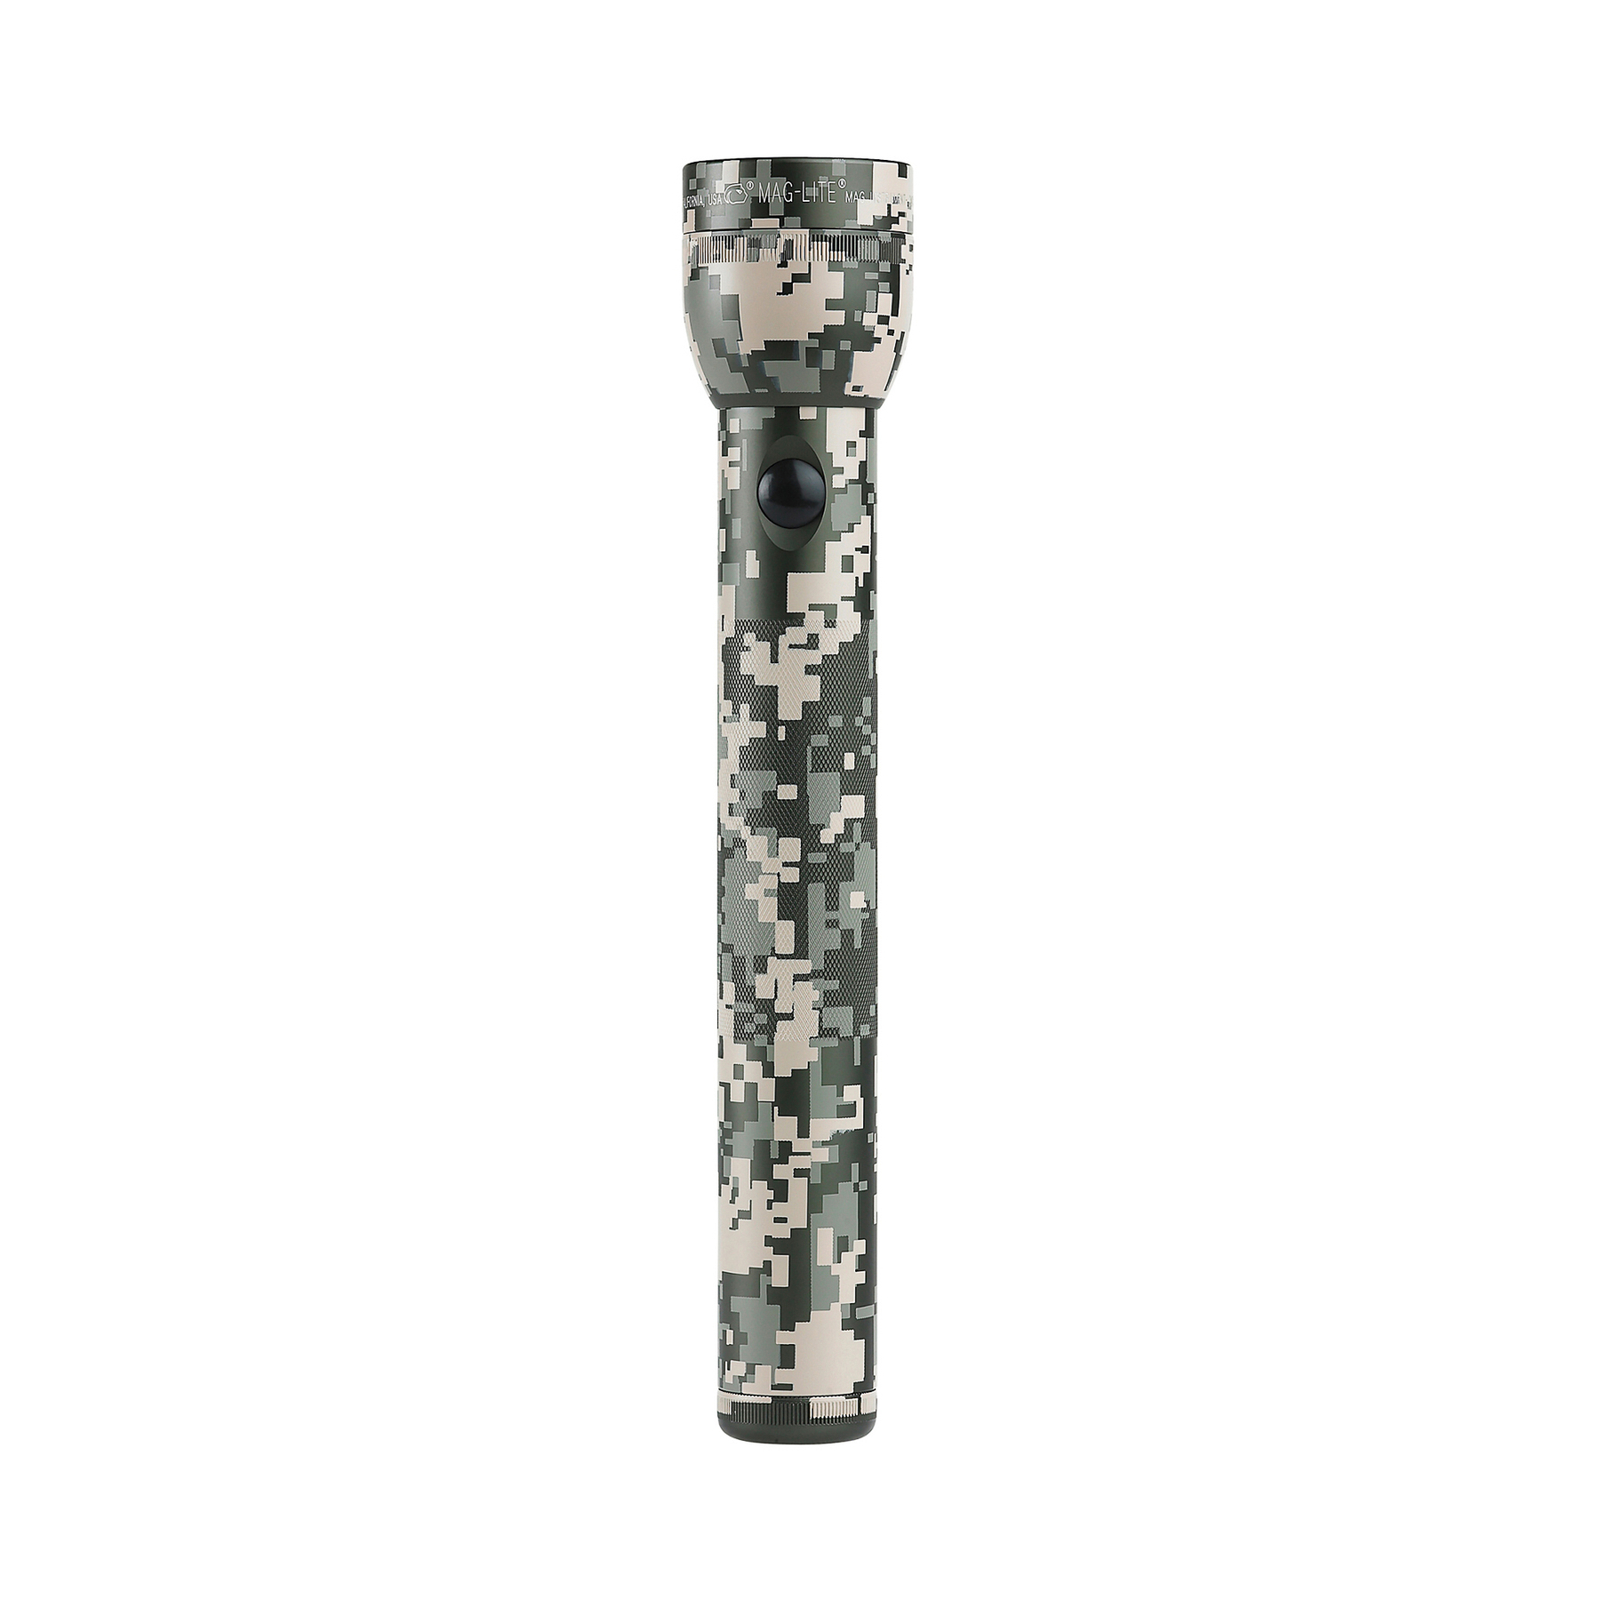 Maglite Xenon torch S3DMR, 3-Cell D, camouflage